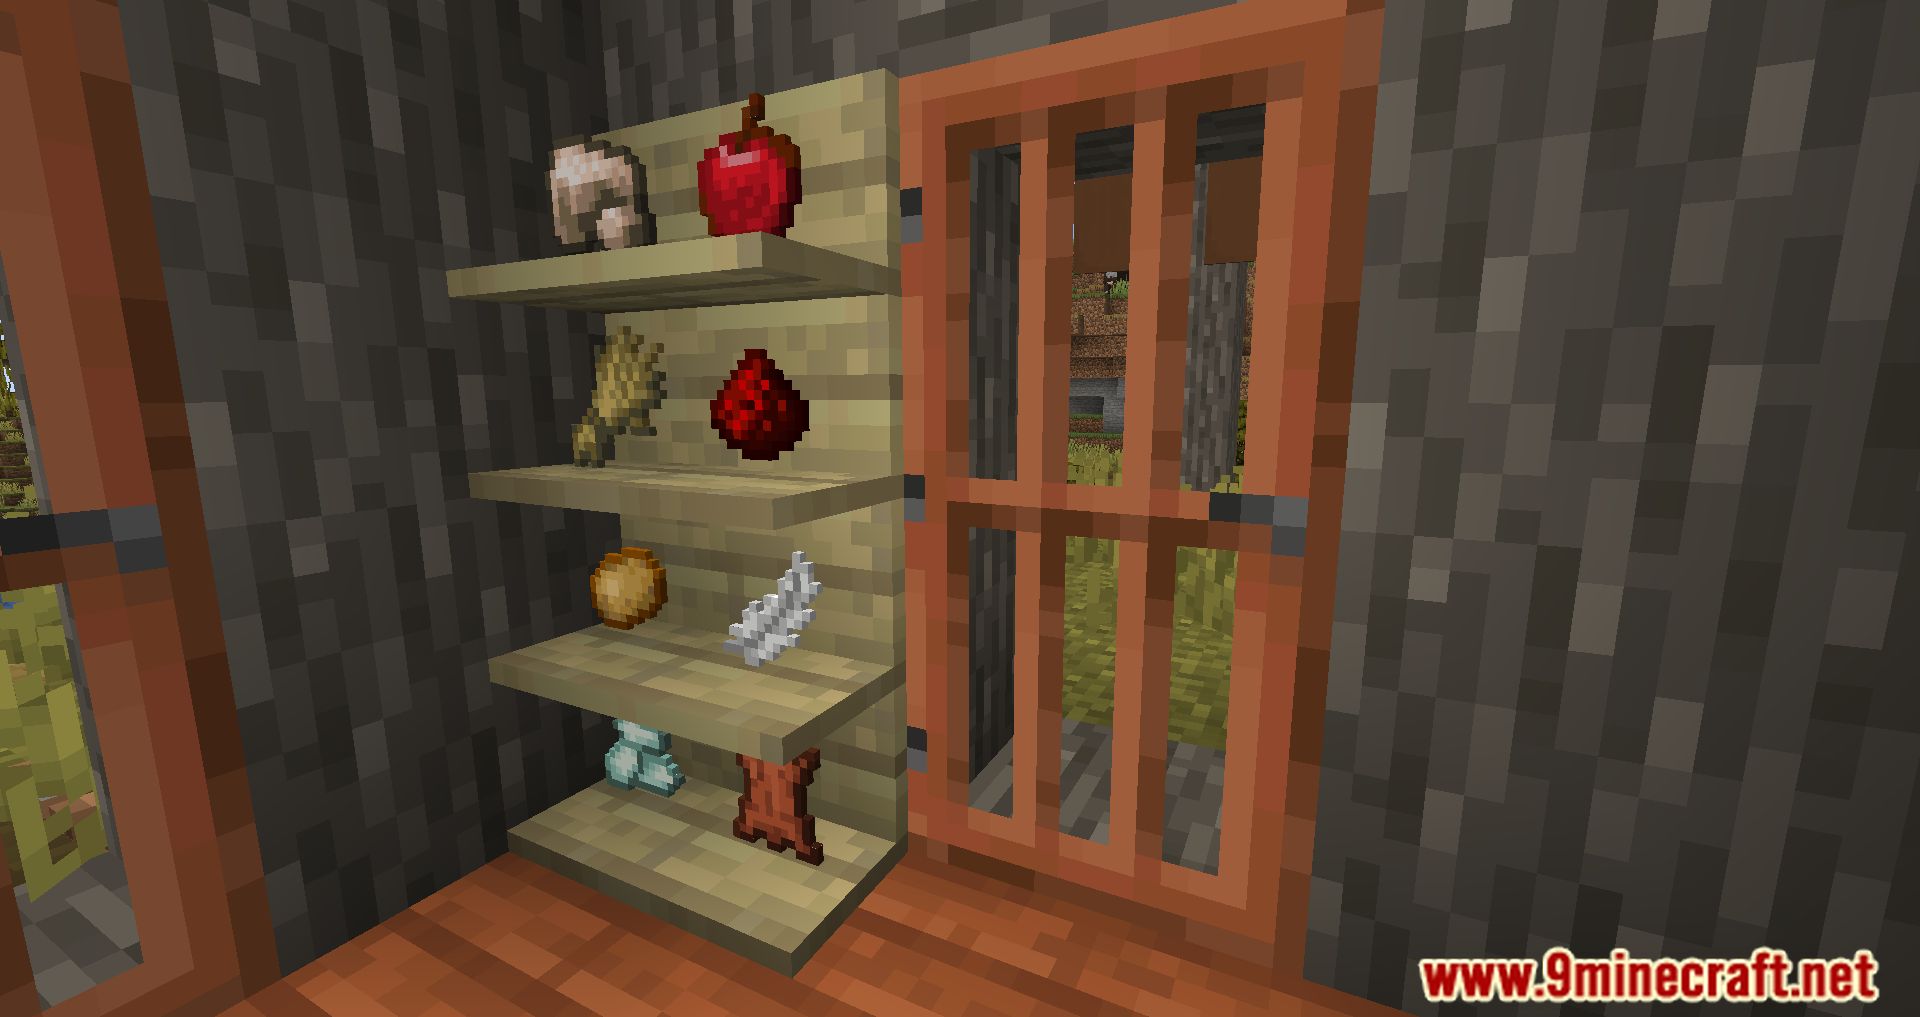 Simple Shelves Mod (1.19.2, 1.18.2) - Display Items And Books 7